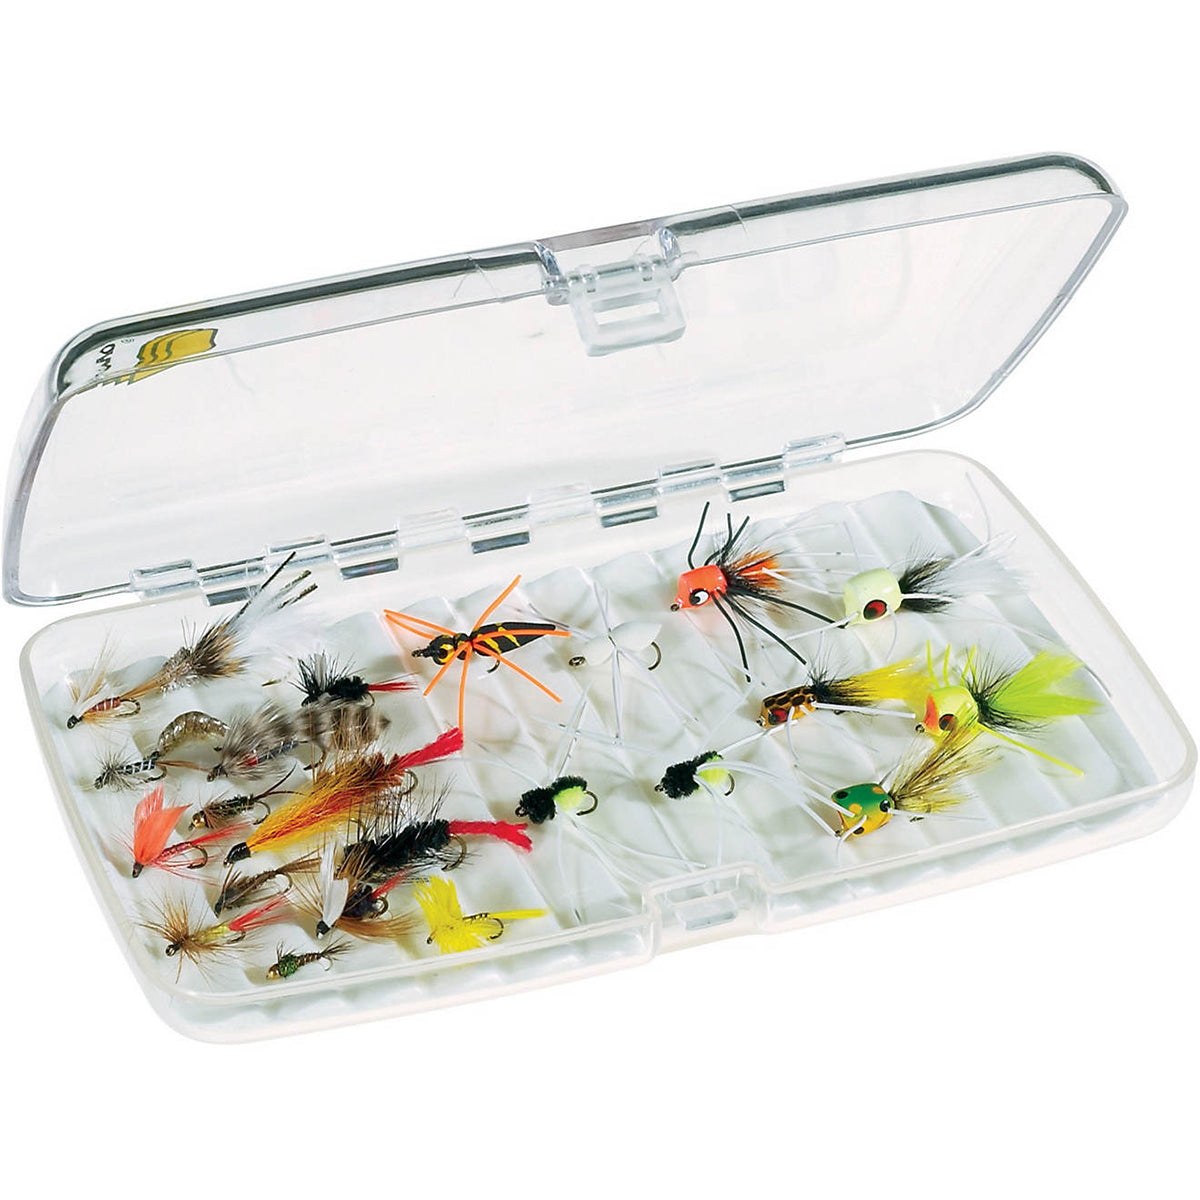 Plano 3584 Large Fly Box - Clear Plano